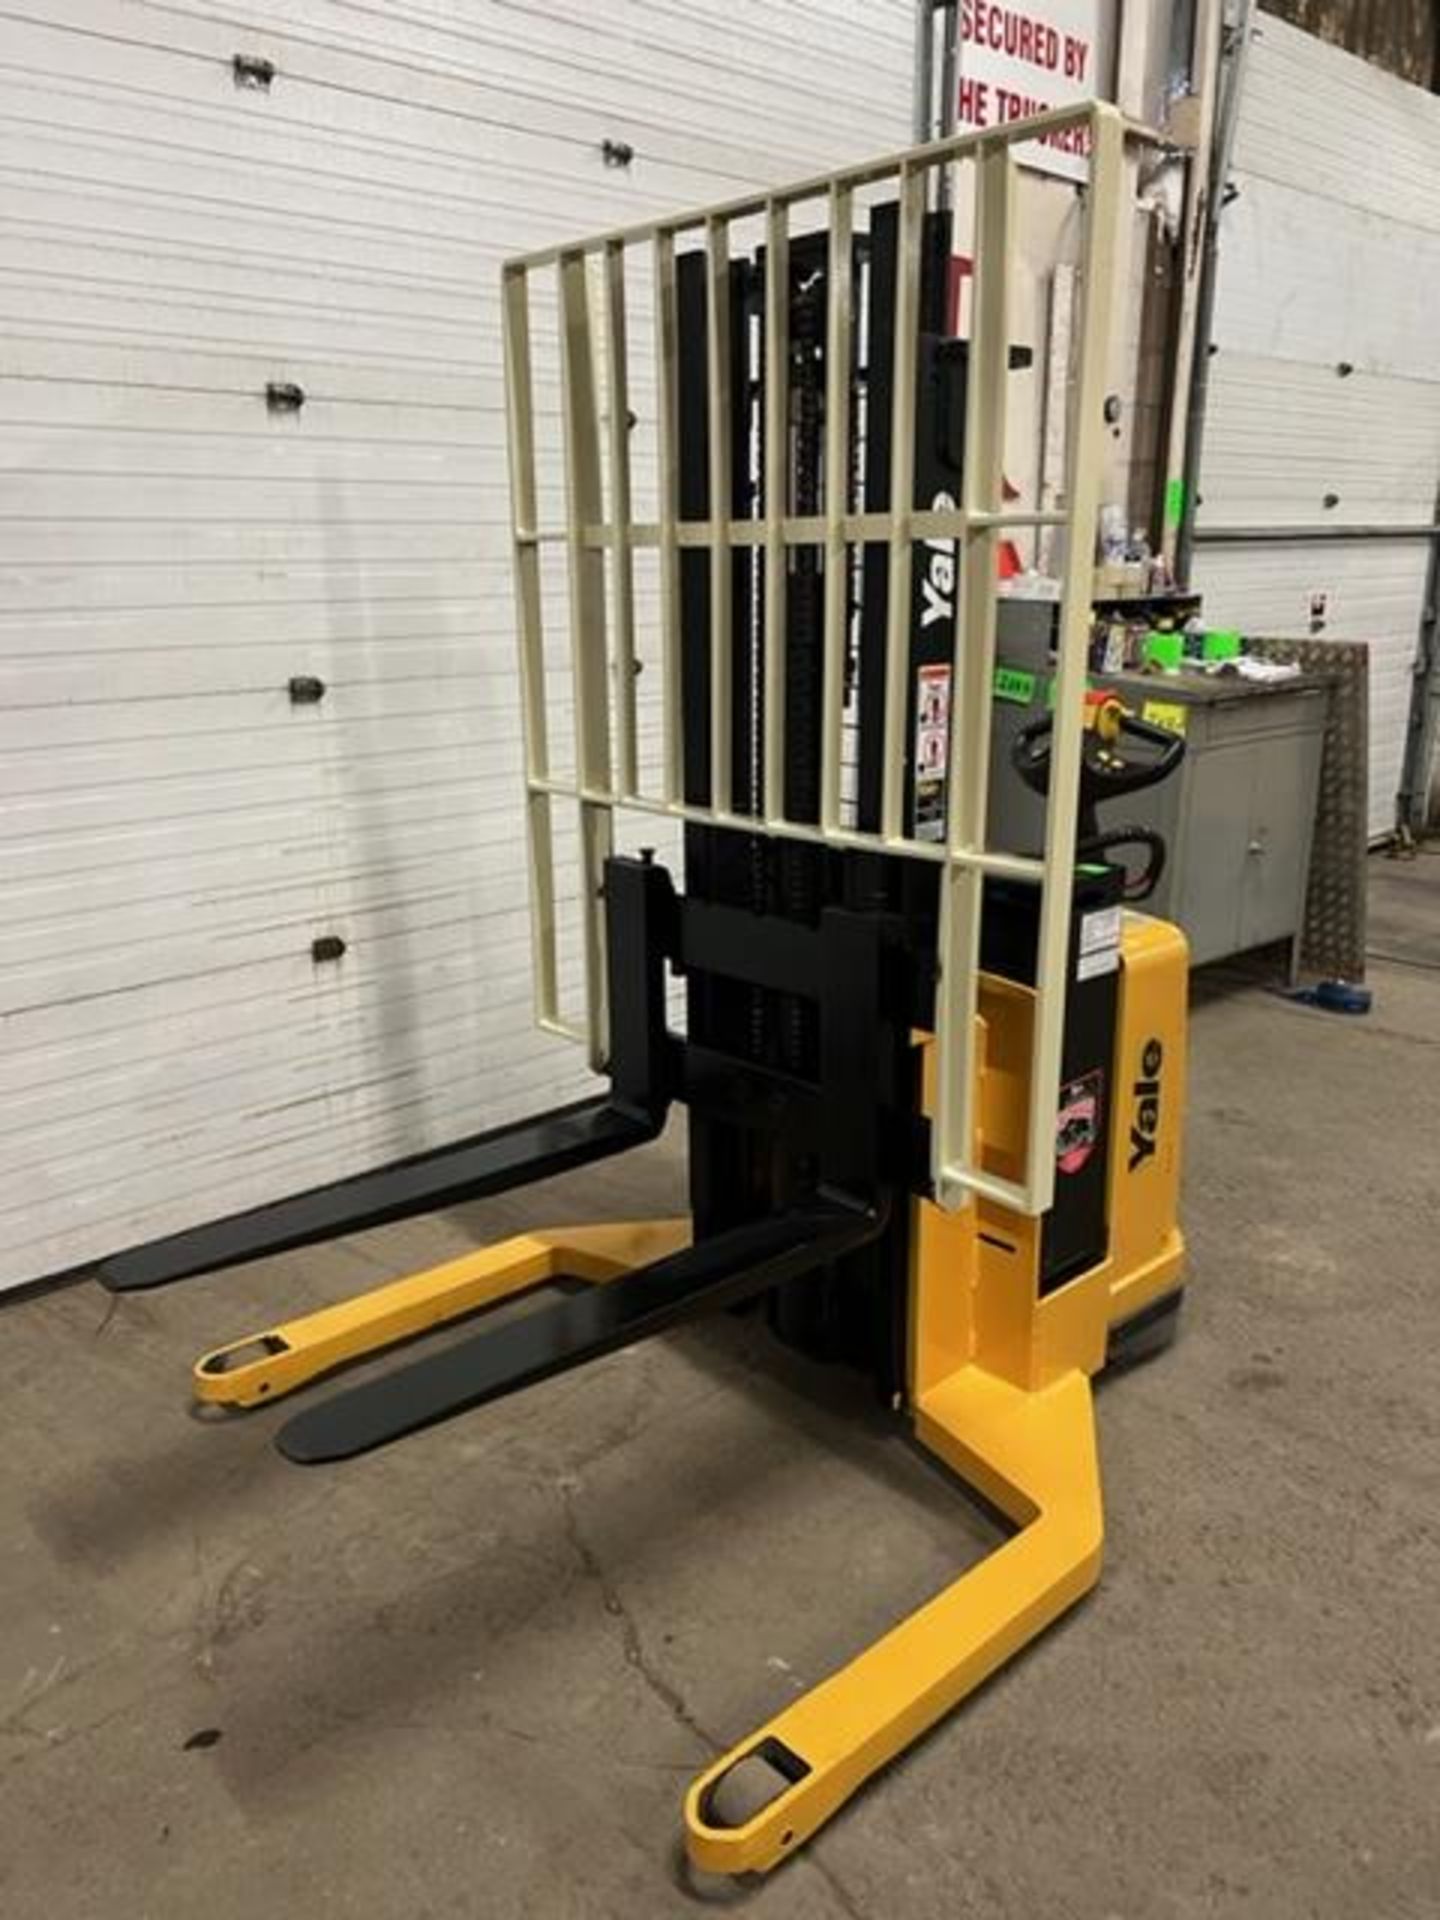 FREE CUSTOMS - 2008 Yale Pallet Stacker Walk Behind 4000lbs capacity electric Powered Pallet Cart - Image 2 of 3